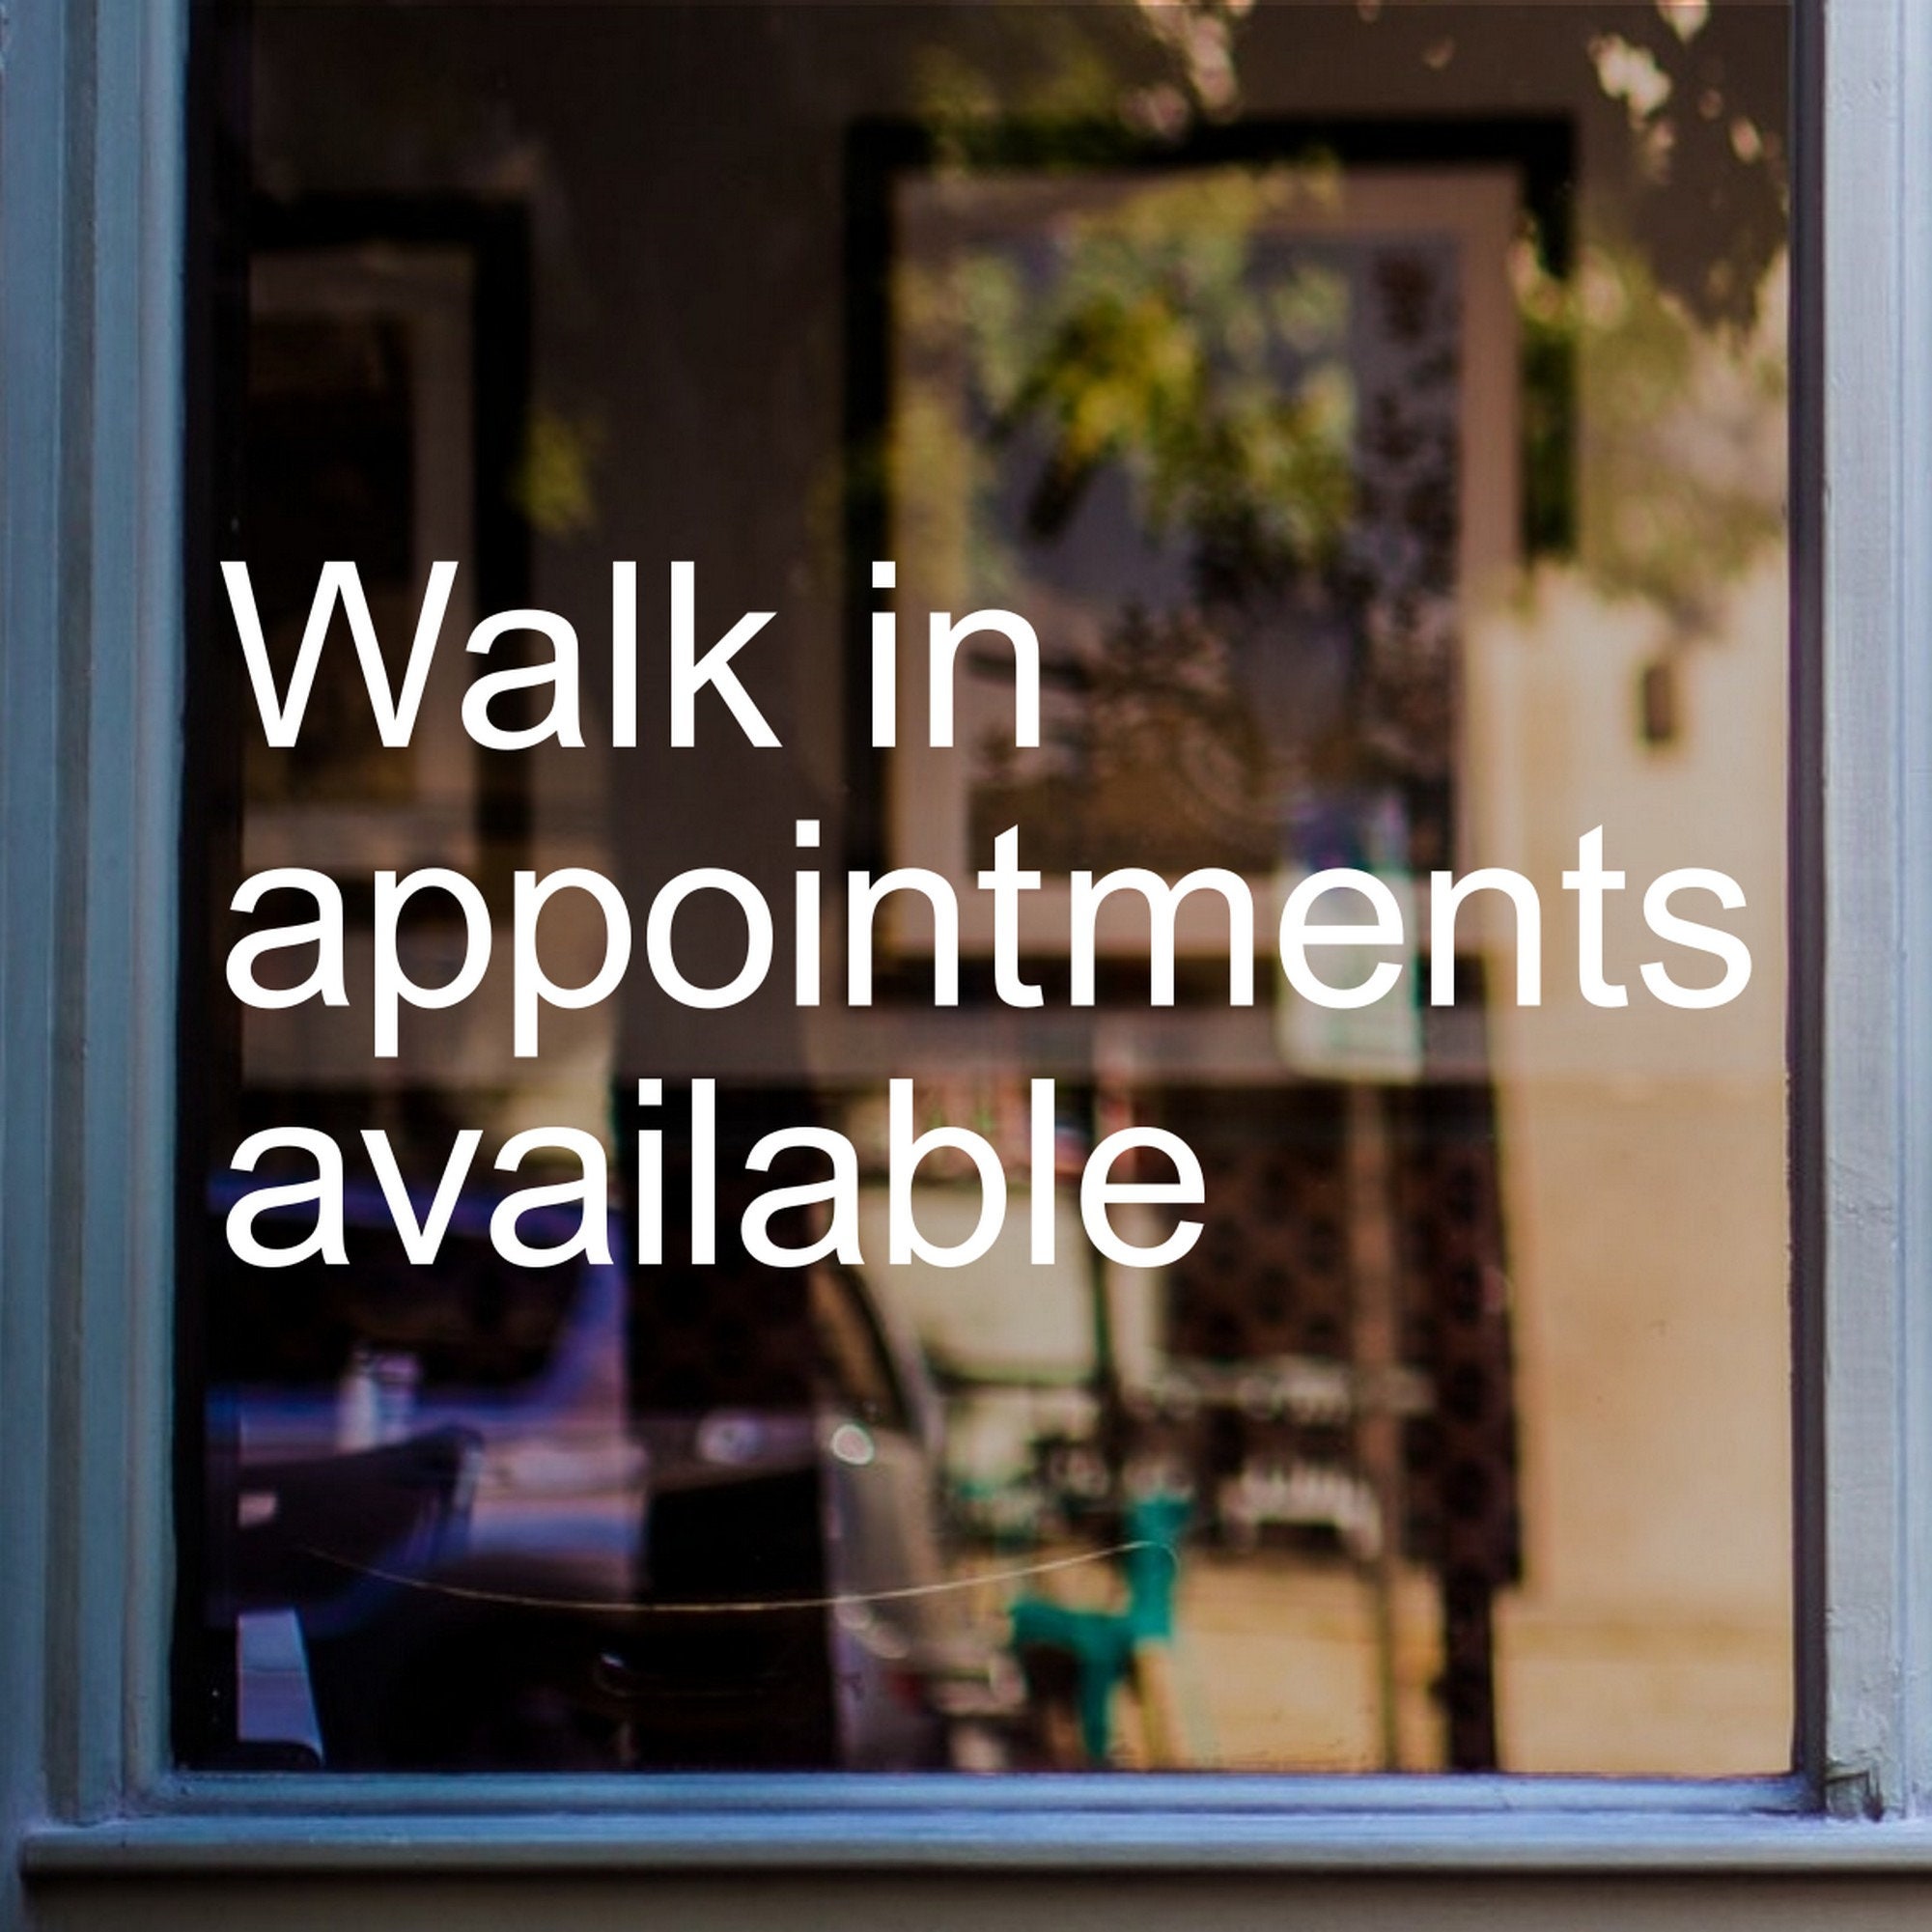 Walk in appointments available Window Sticker Barber Salon Hairdresser Decal 